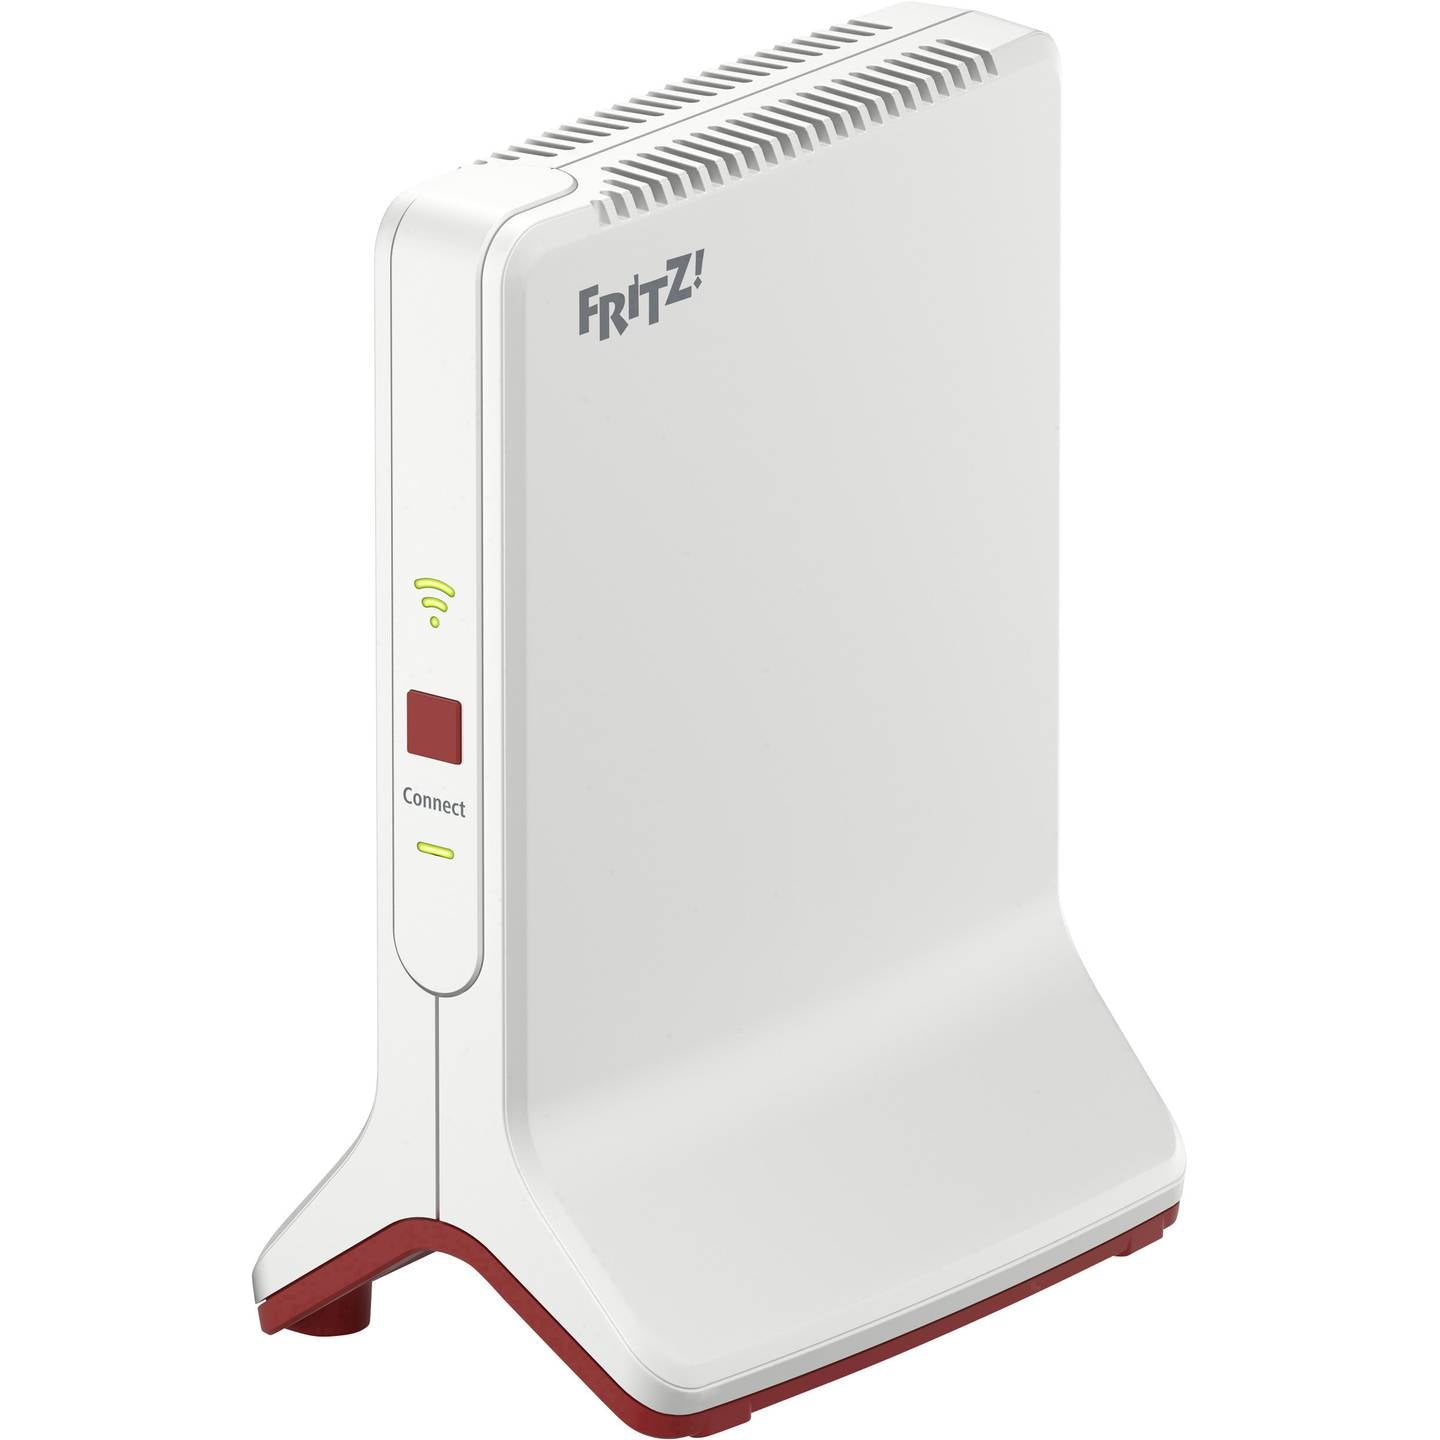 FRITZ!Repeater 3000 - Wifi versterker - Tri-band - Wireless AC - 3000 Mbps